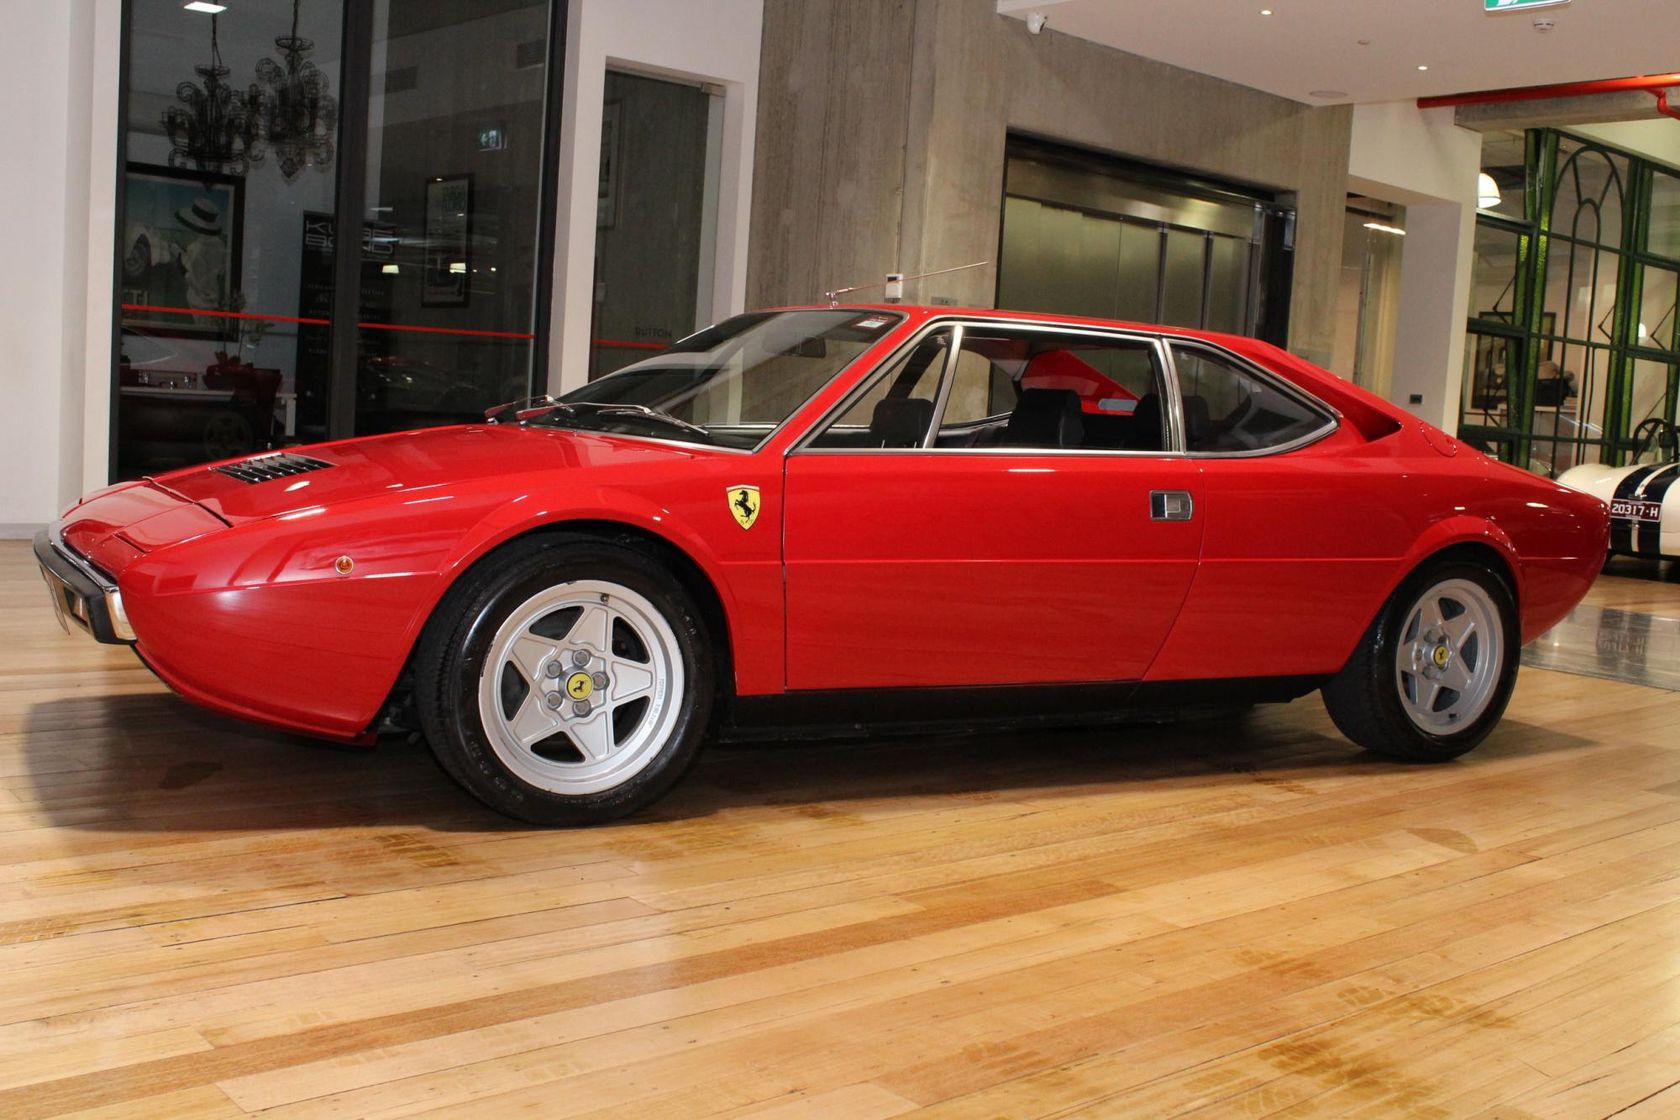 1975 Ferrari Dino 308 GT4 Coupe for sale on Luxify